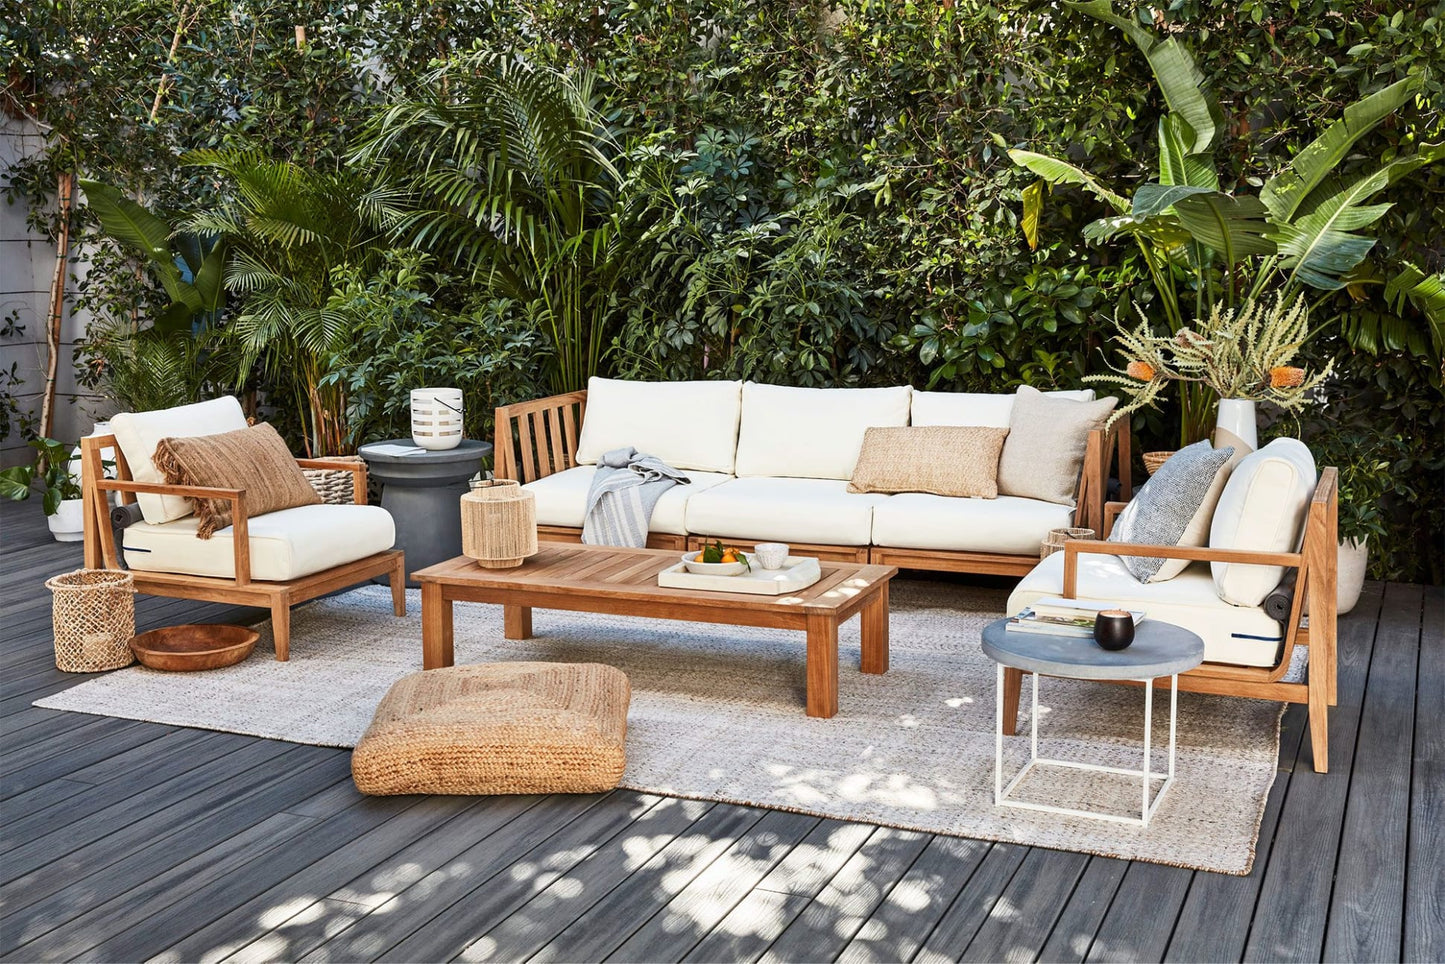 Live Outer 98" Teak Outdoor Sofa With Armless Chairs and Palisades Cream Cushion (5-Seat)